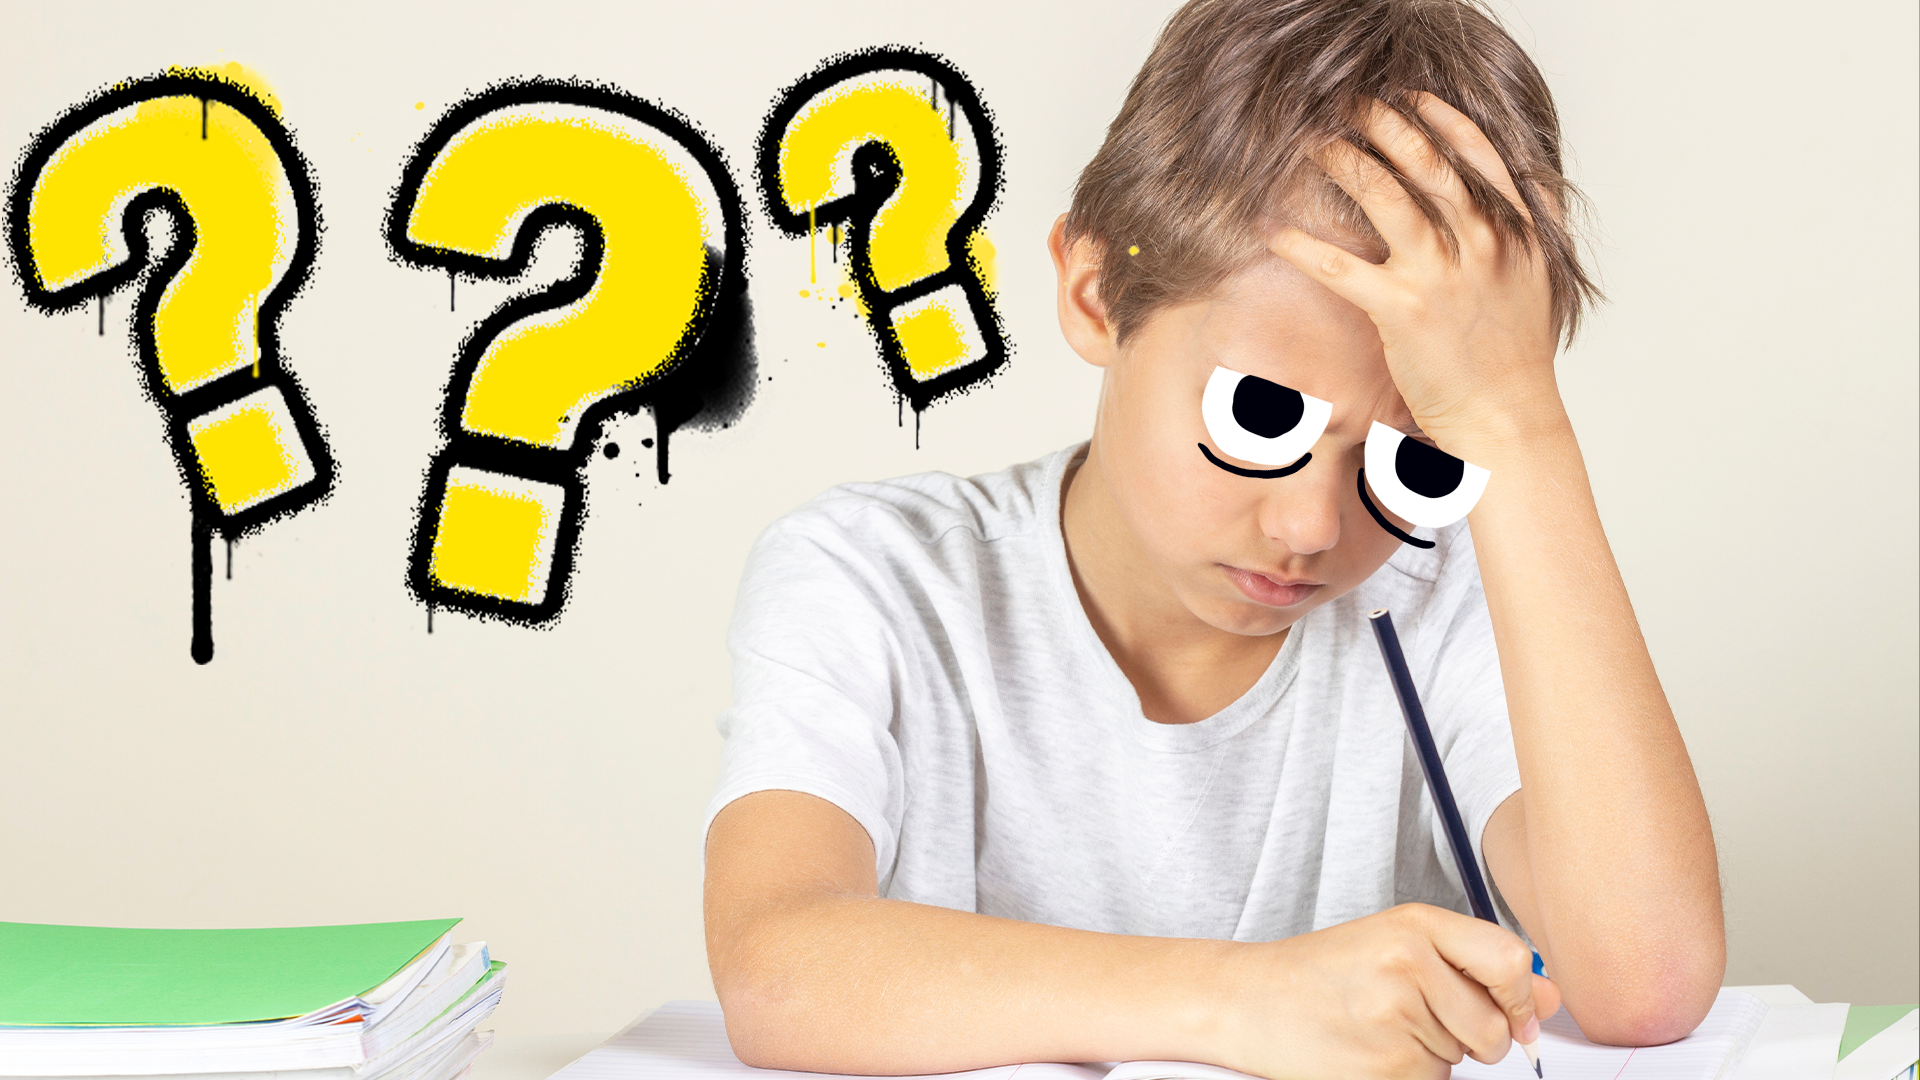 Boy doing homework and question marks